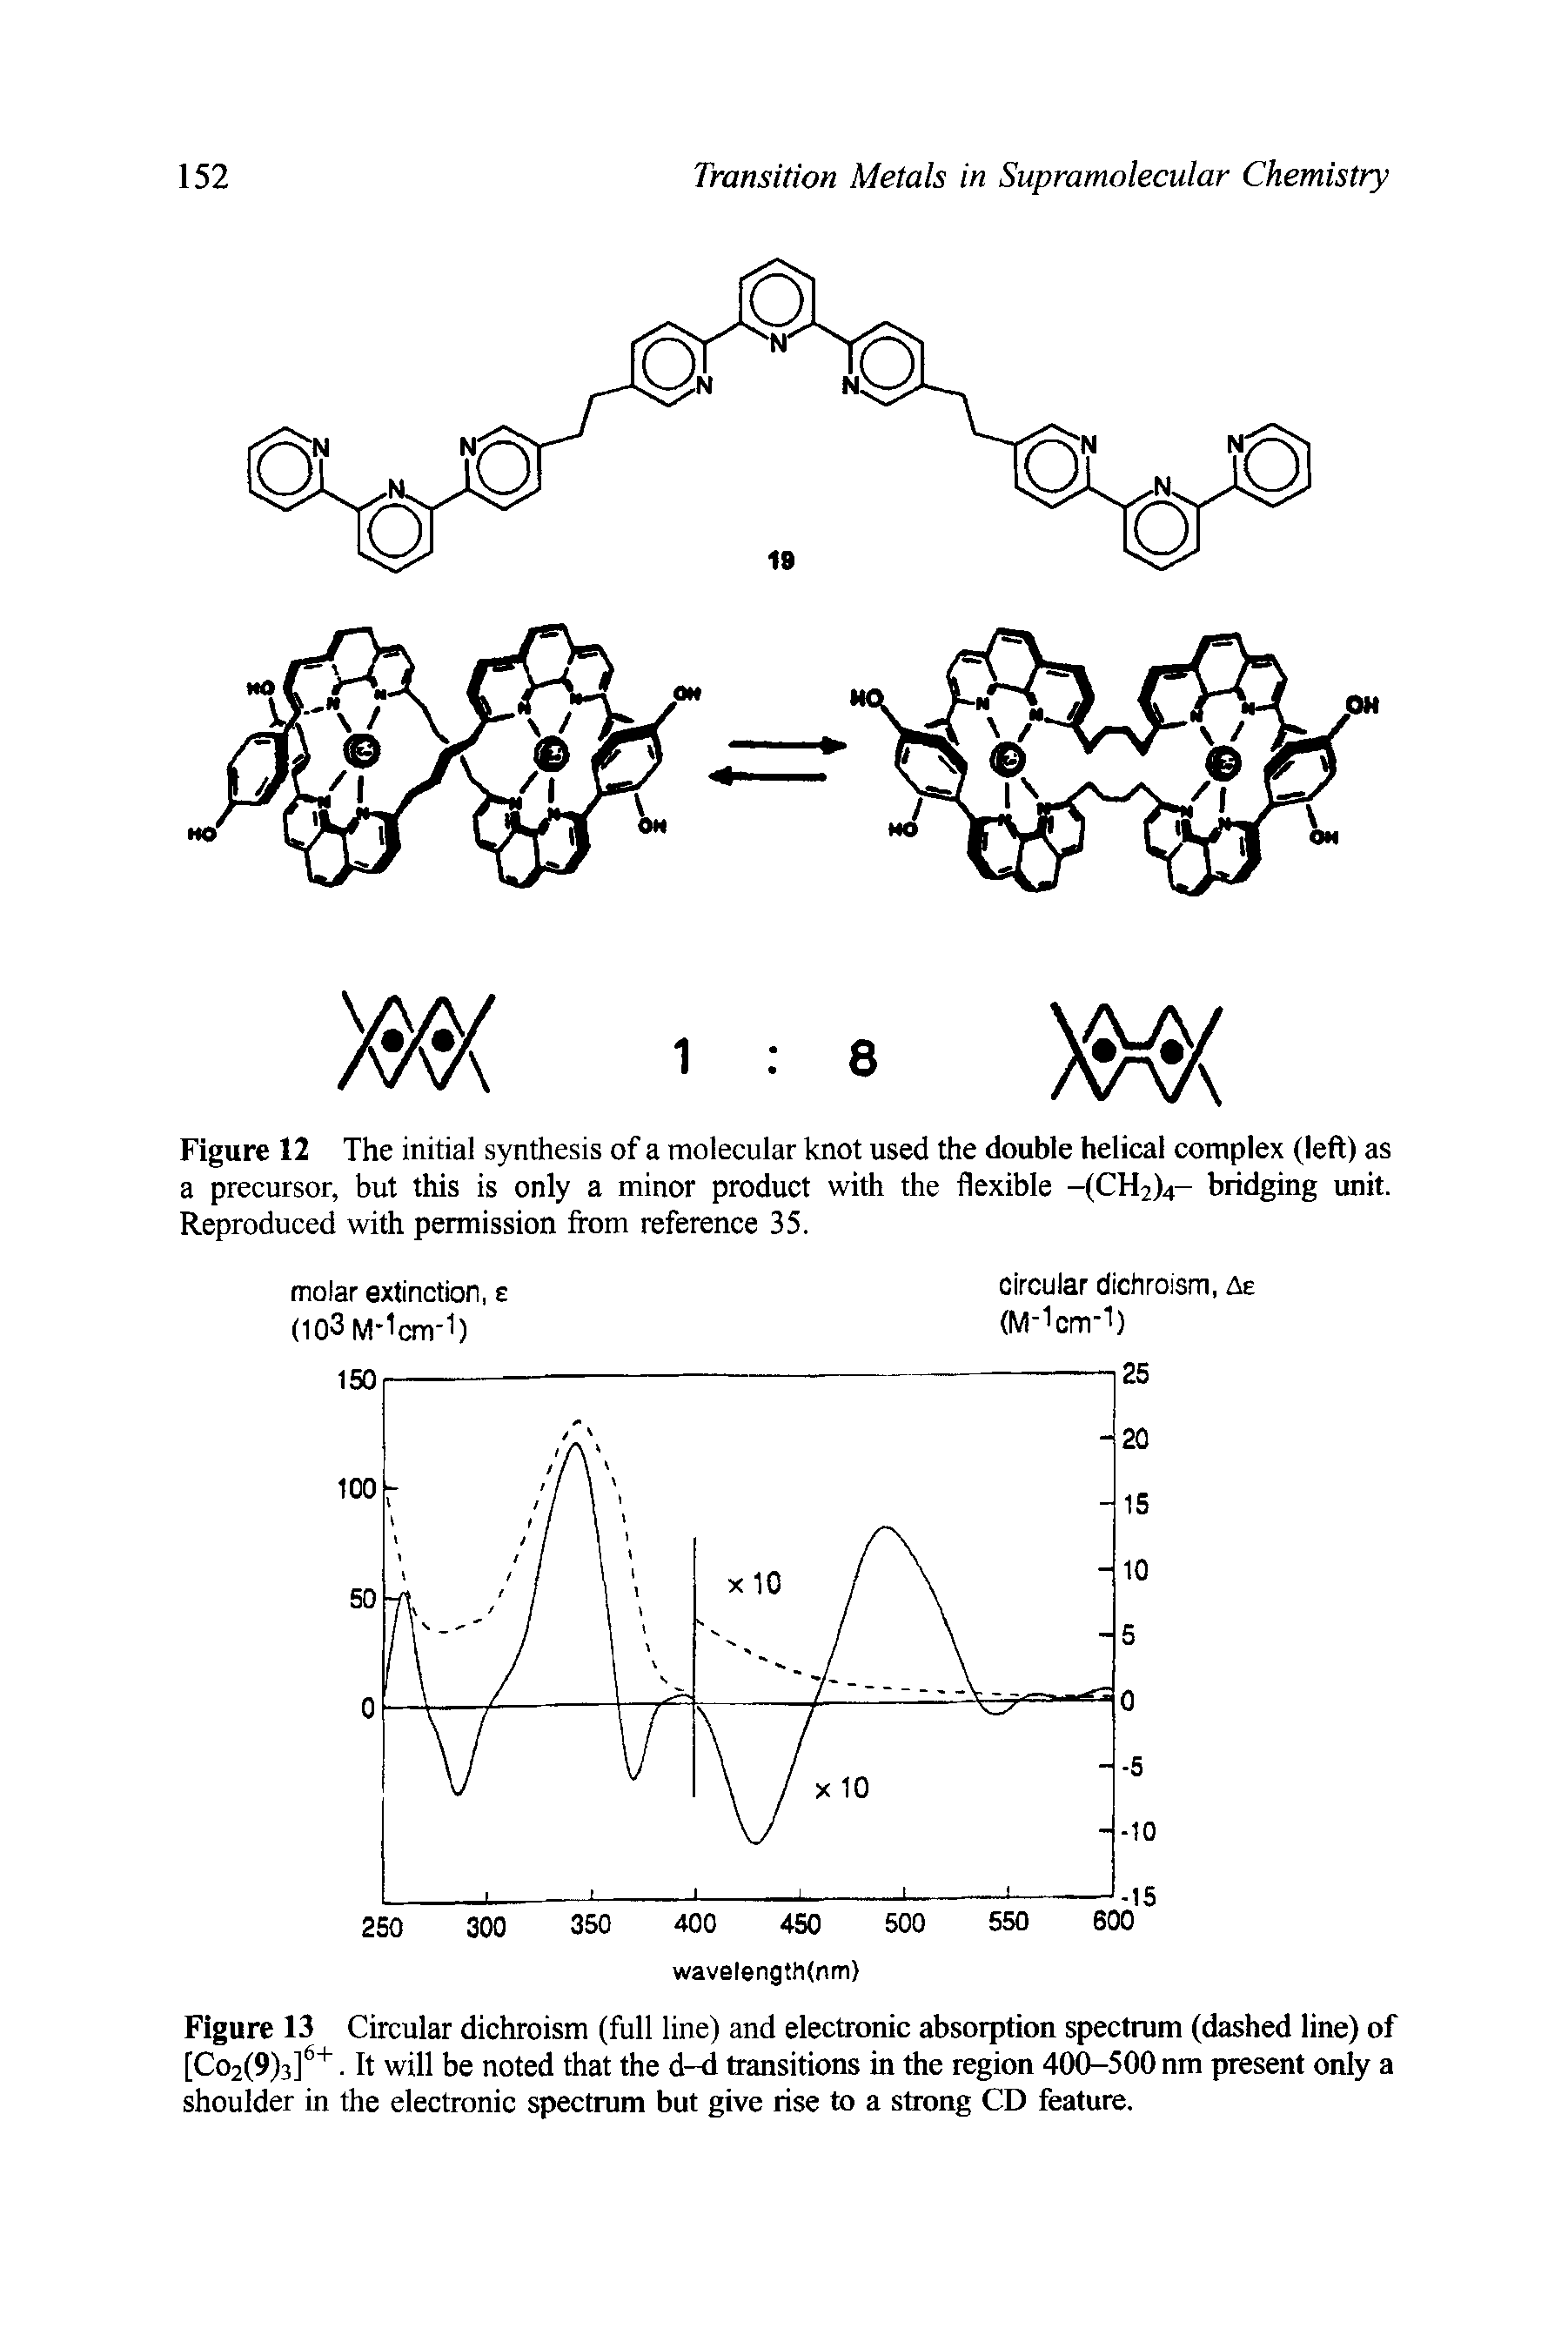 Figure 12 The initial synthesis of a molecular knot used the double helical complex (left) as a precursor, but this is only a minor product with the flexible -(CH2)4- bridging unit. Reproduced with permission from reference 35.